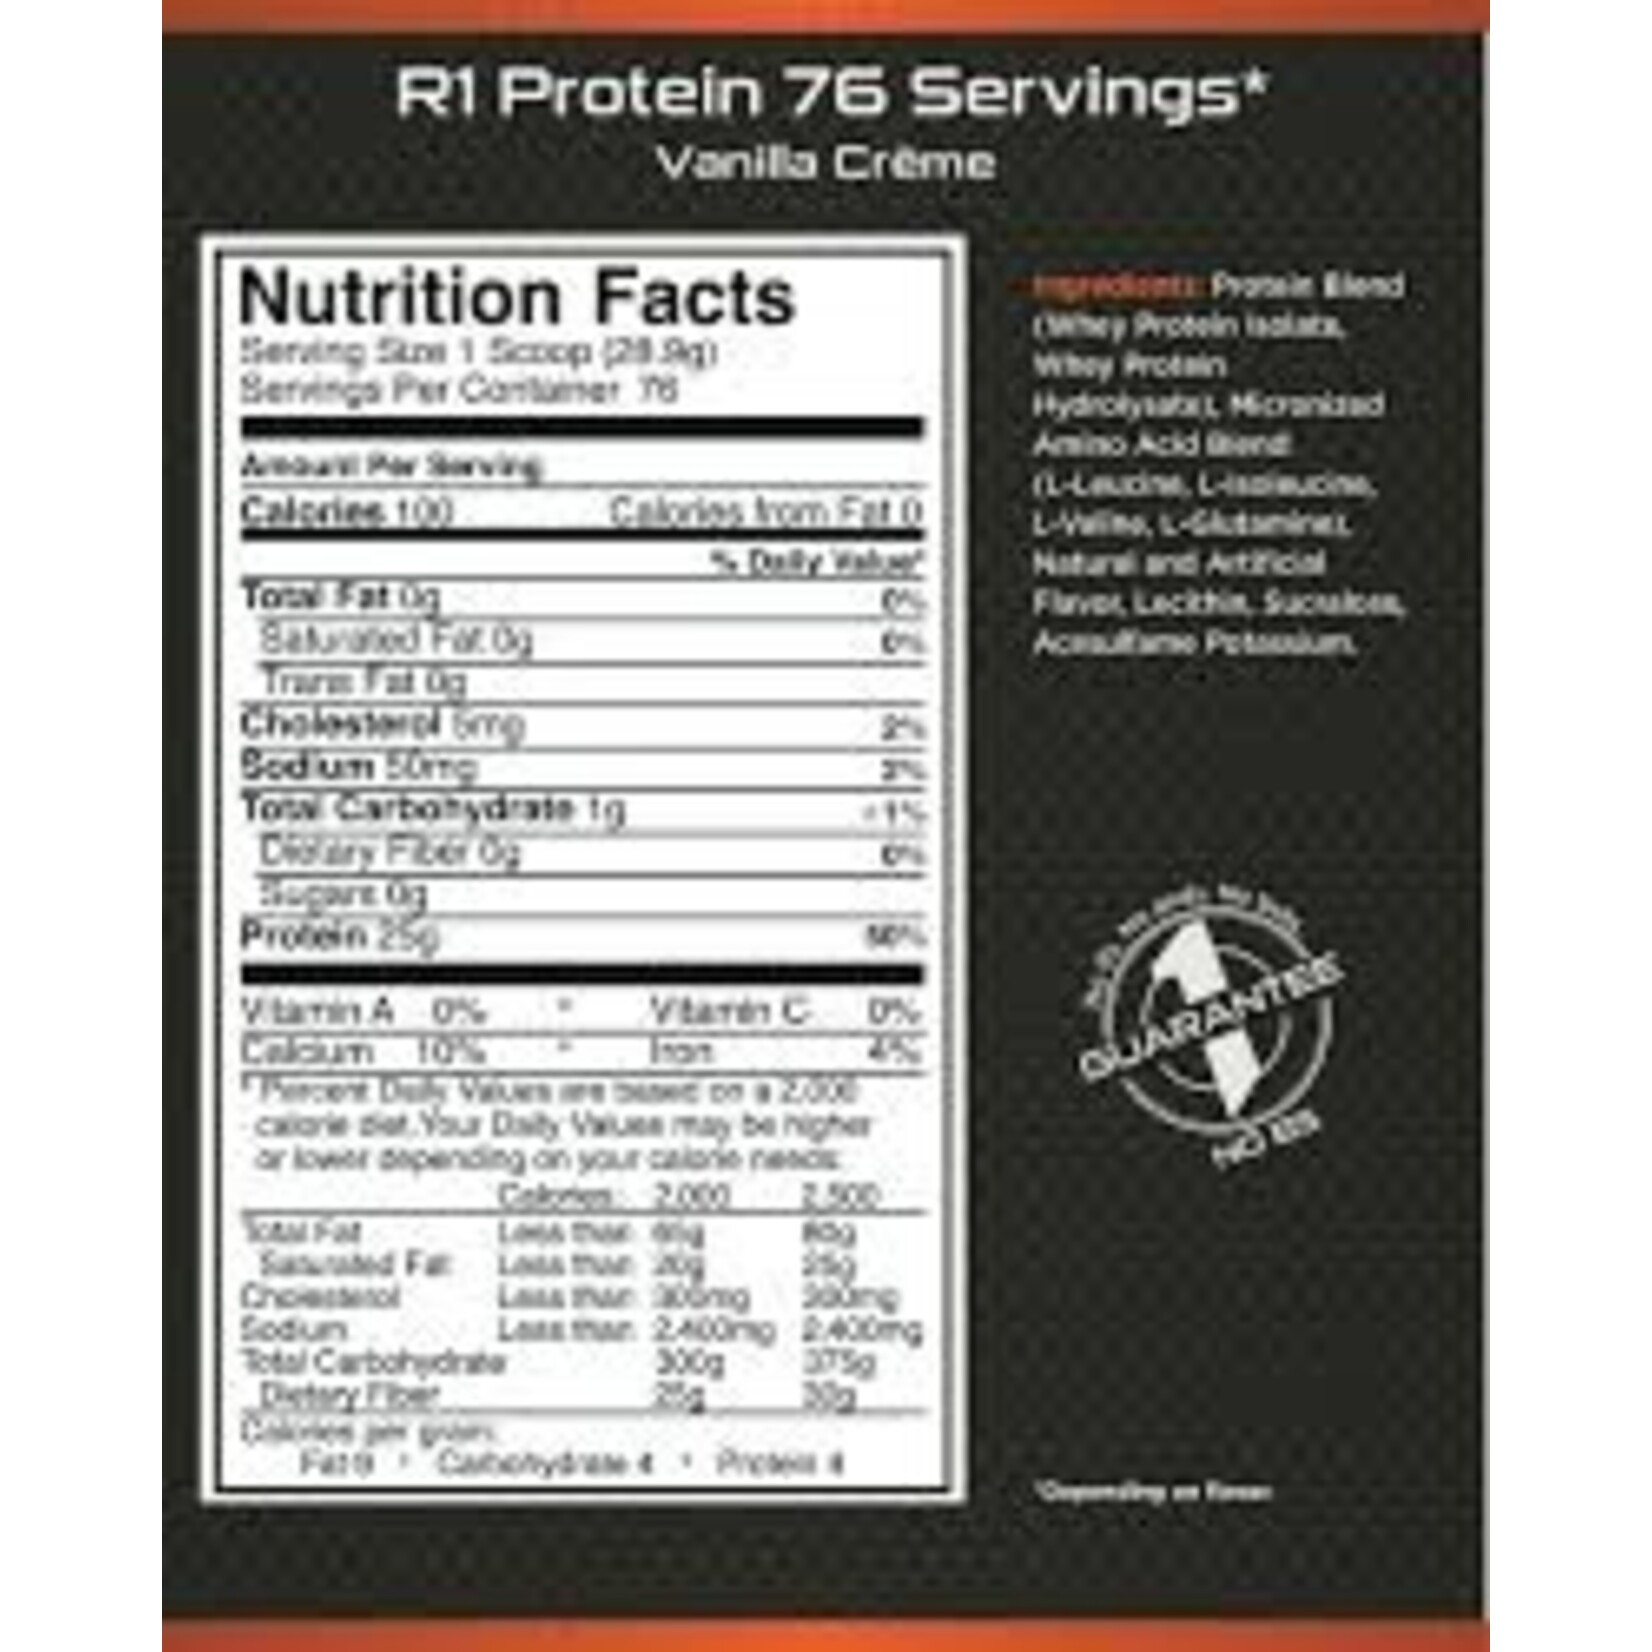 Rule 1 R1 Protein